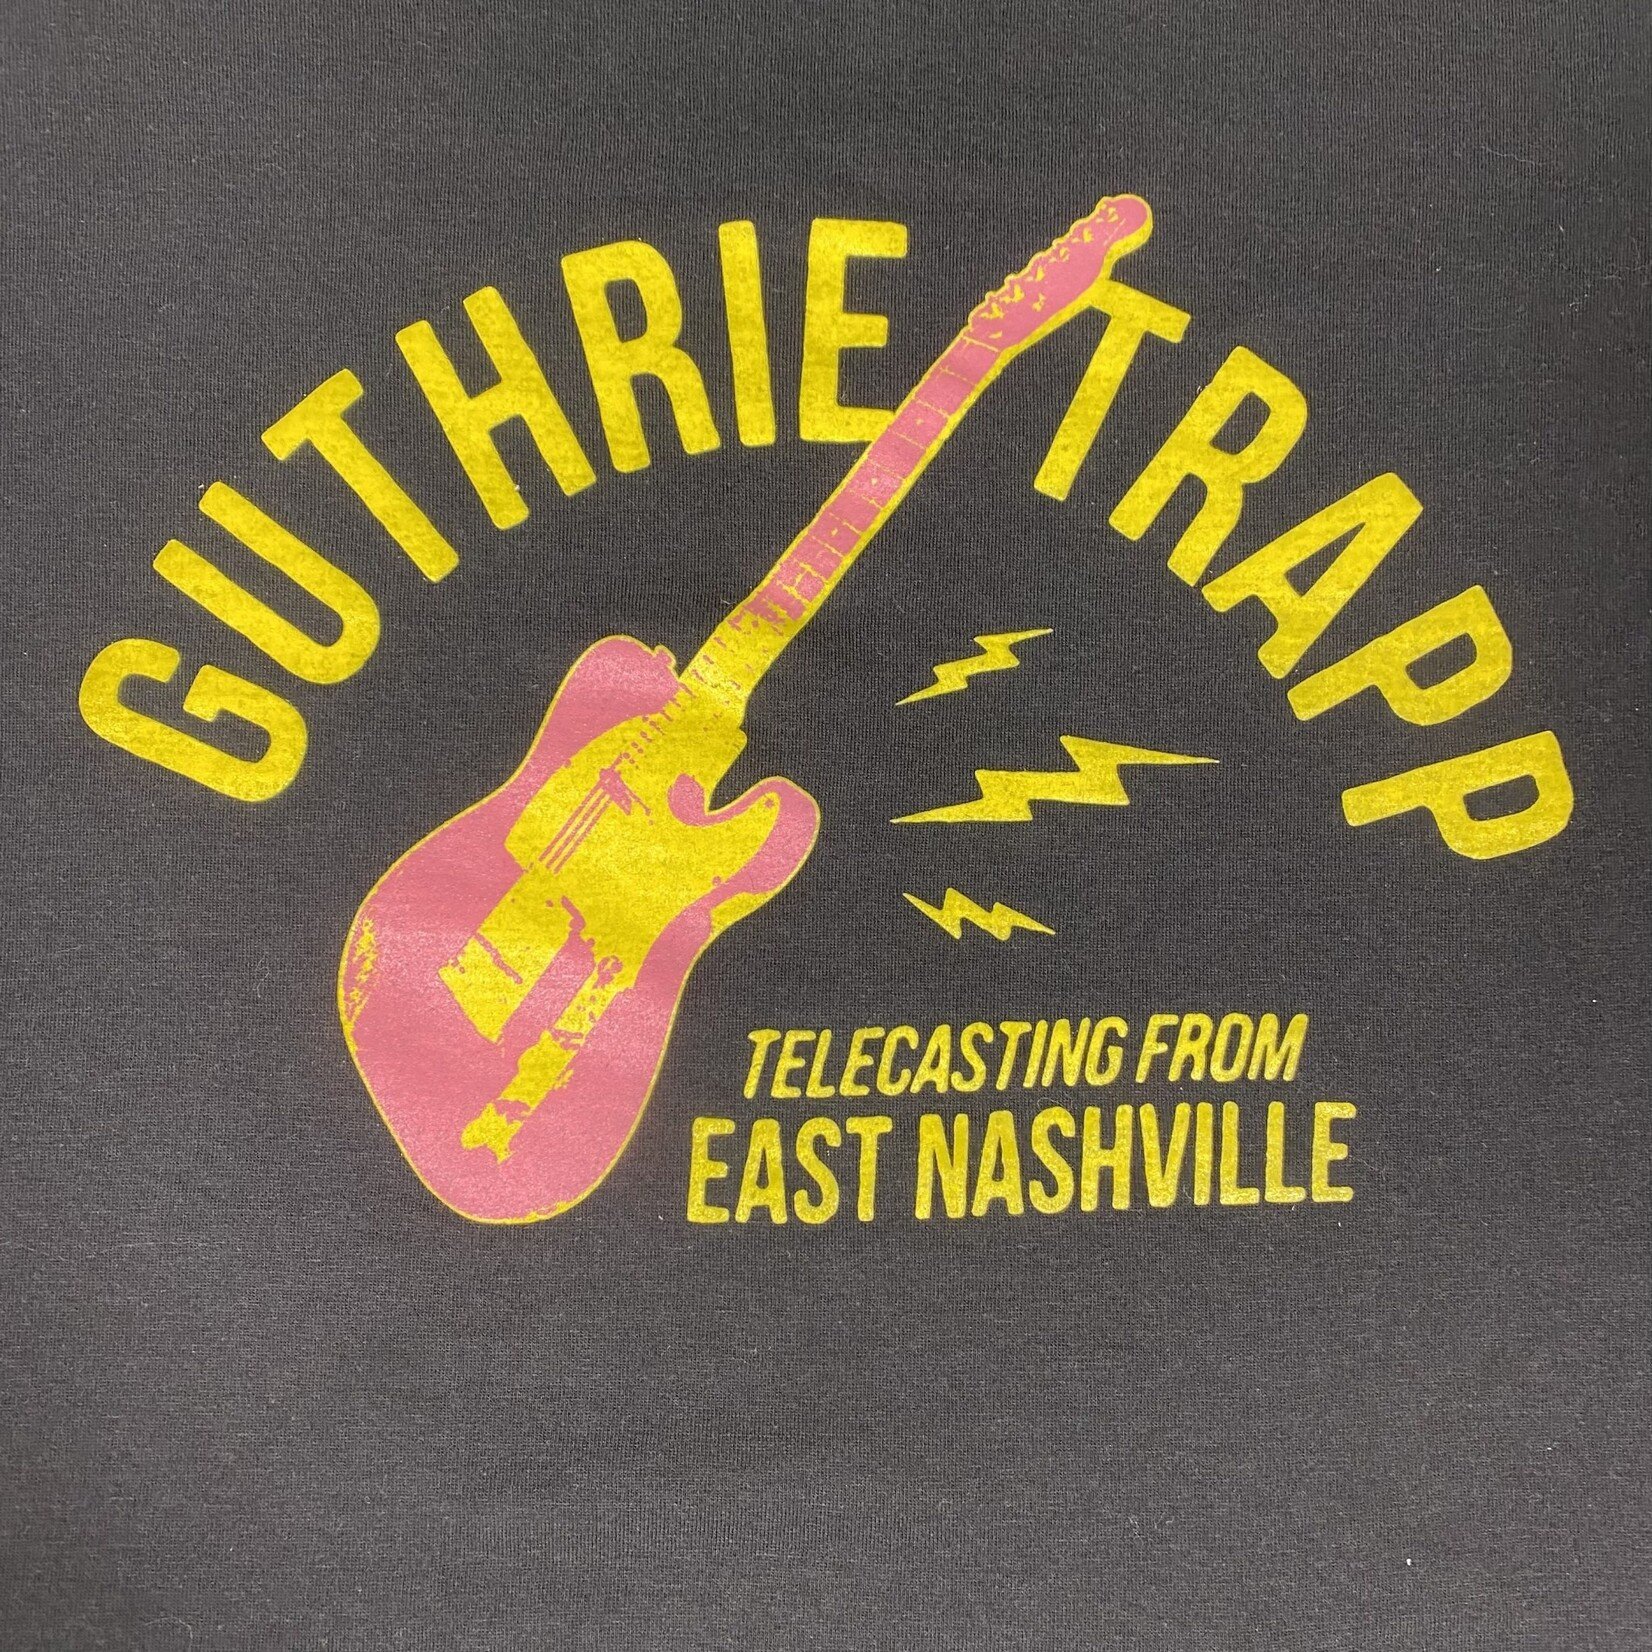 Guthrie Trapp Trio Guthrie Trapp "Telecasting" Shirt Yellow/Pink